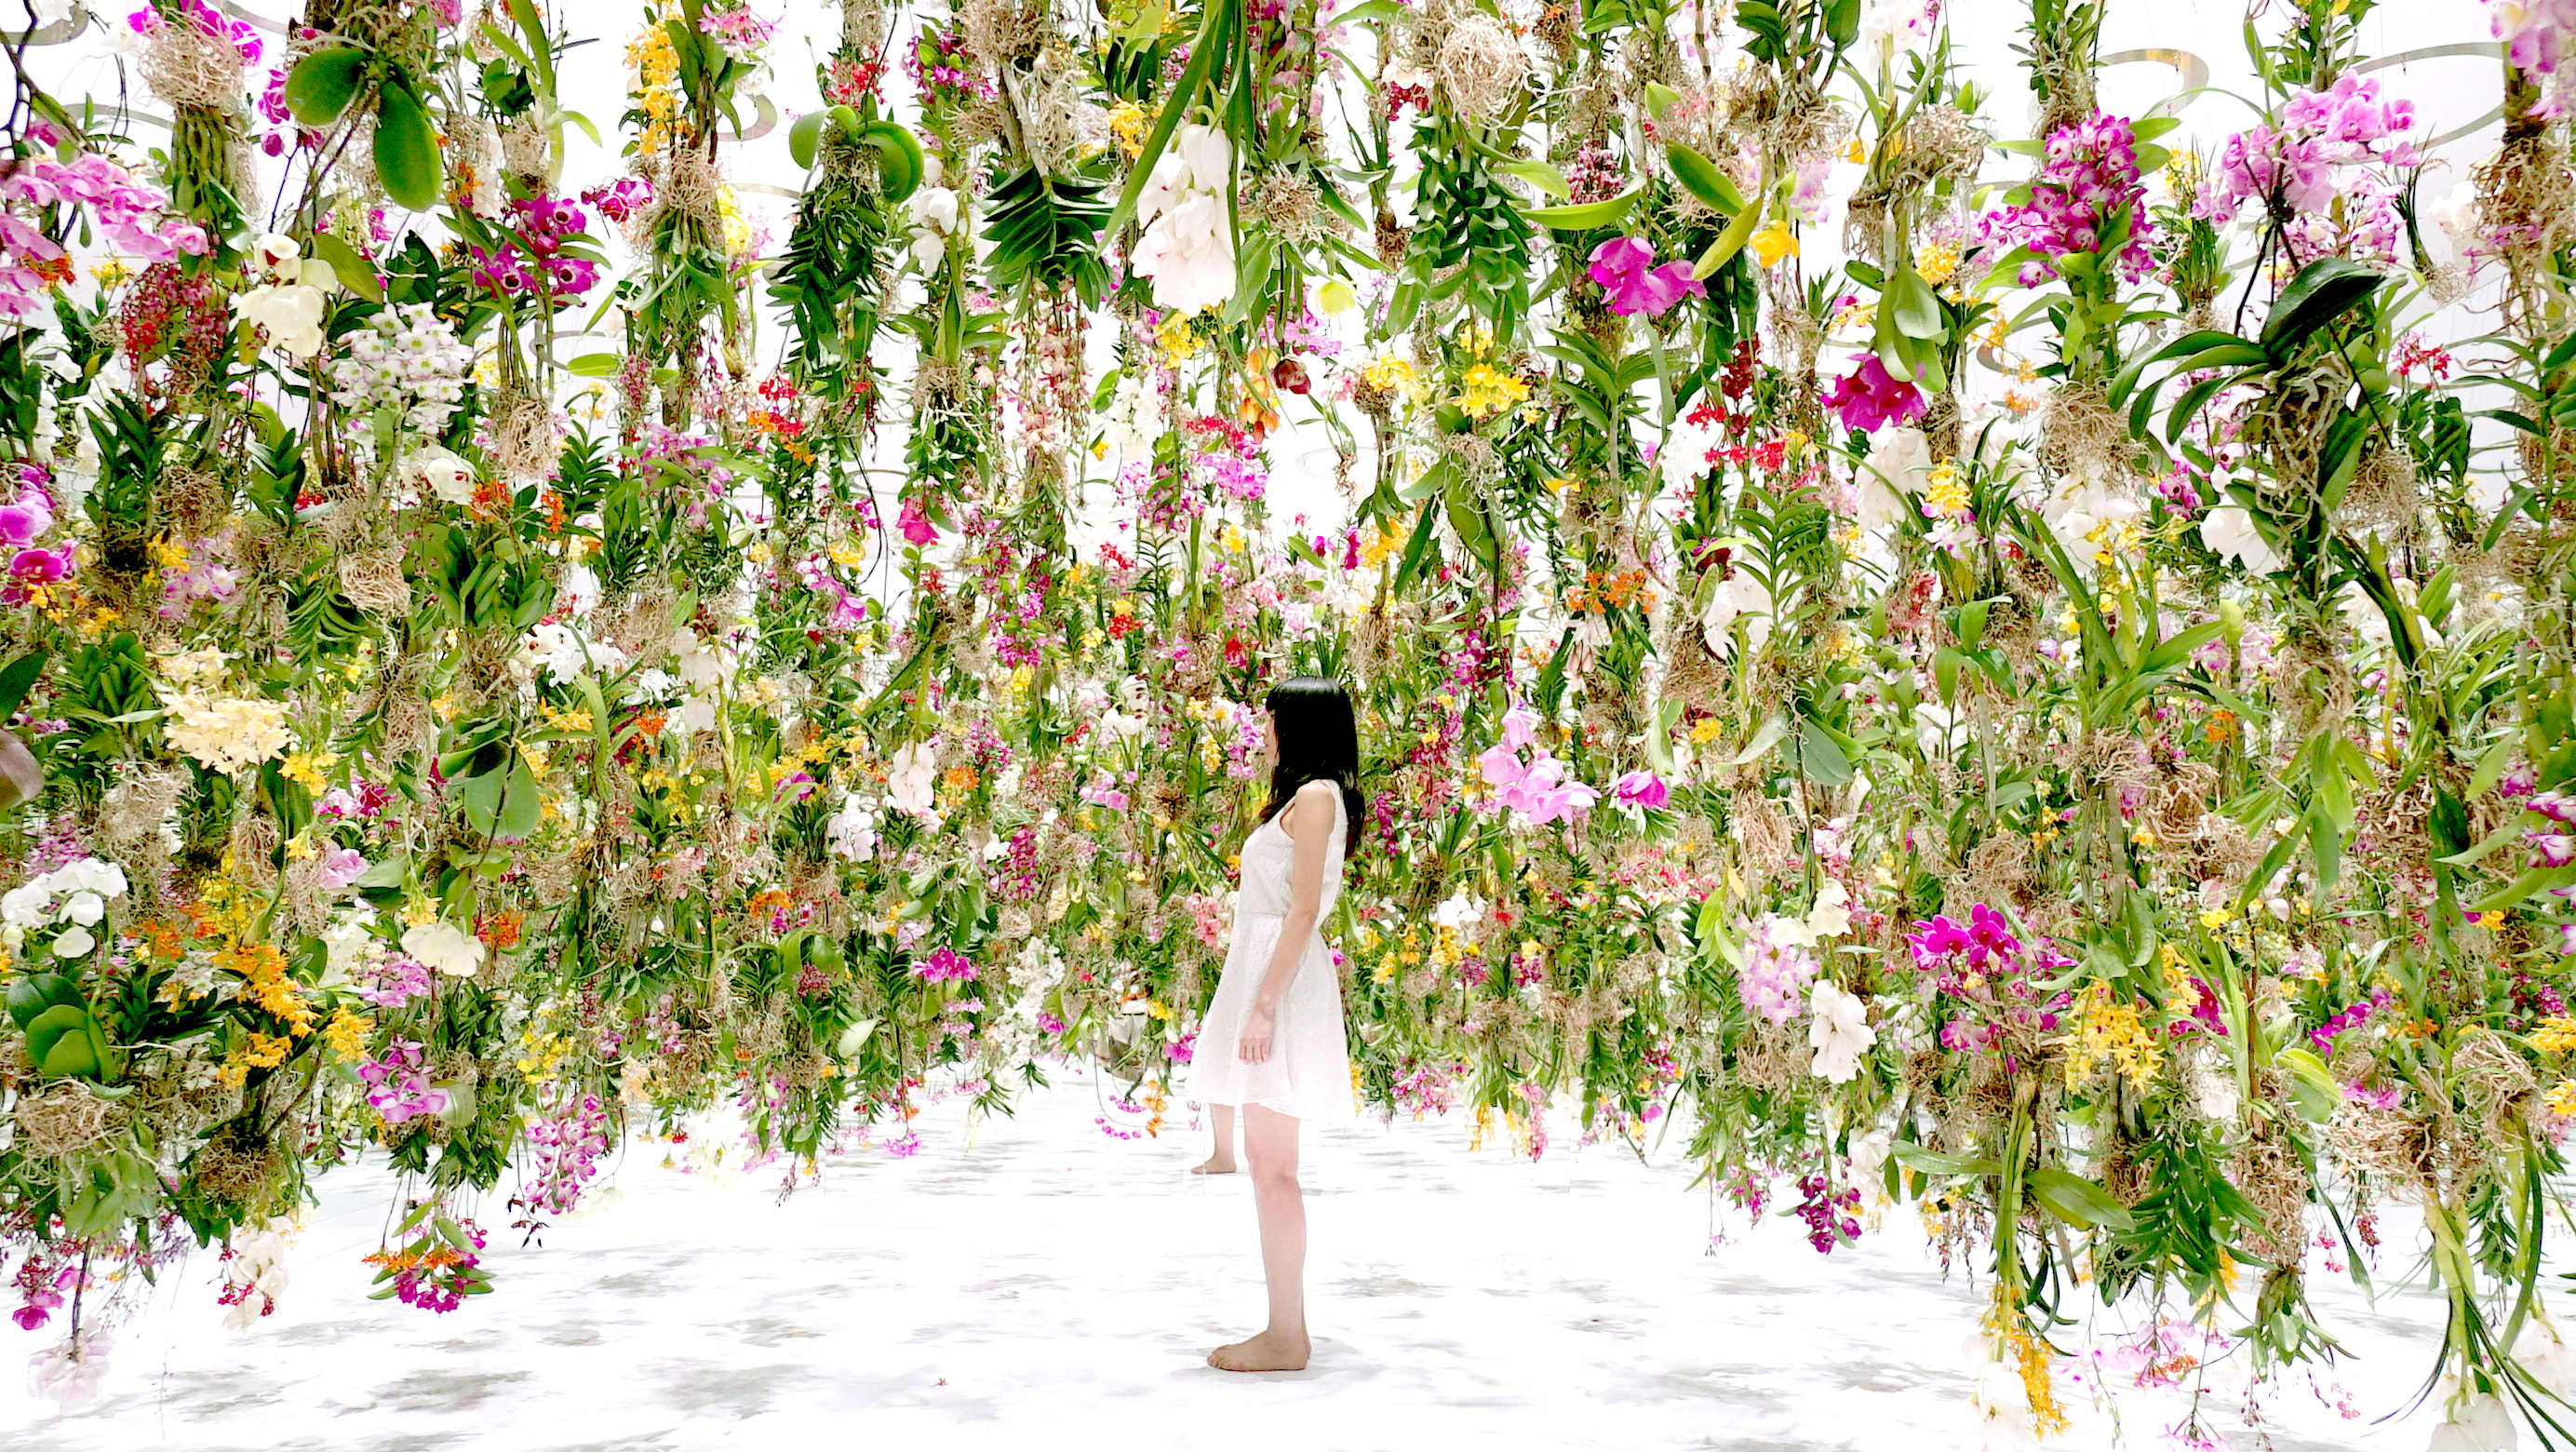 A Suspended Flower Garden That Lifts Out of the Way When a Person ...